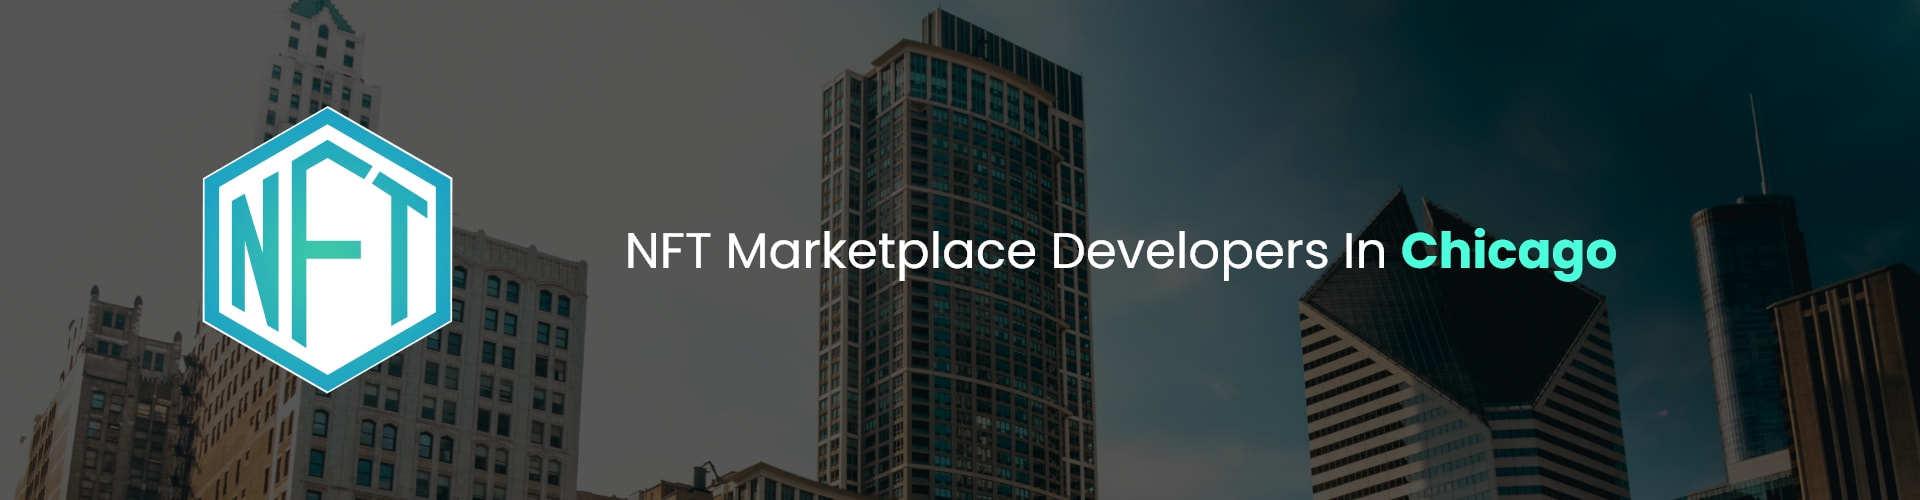 hire nft marketplace developers in chicago